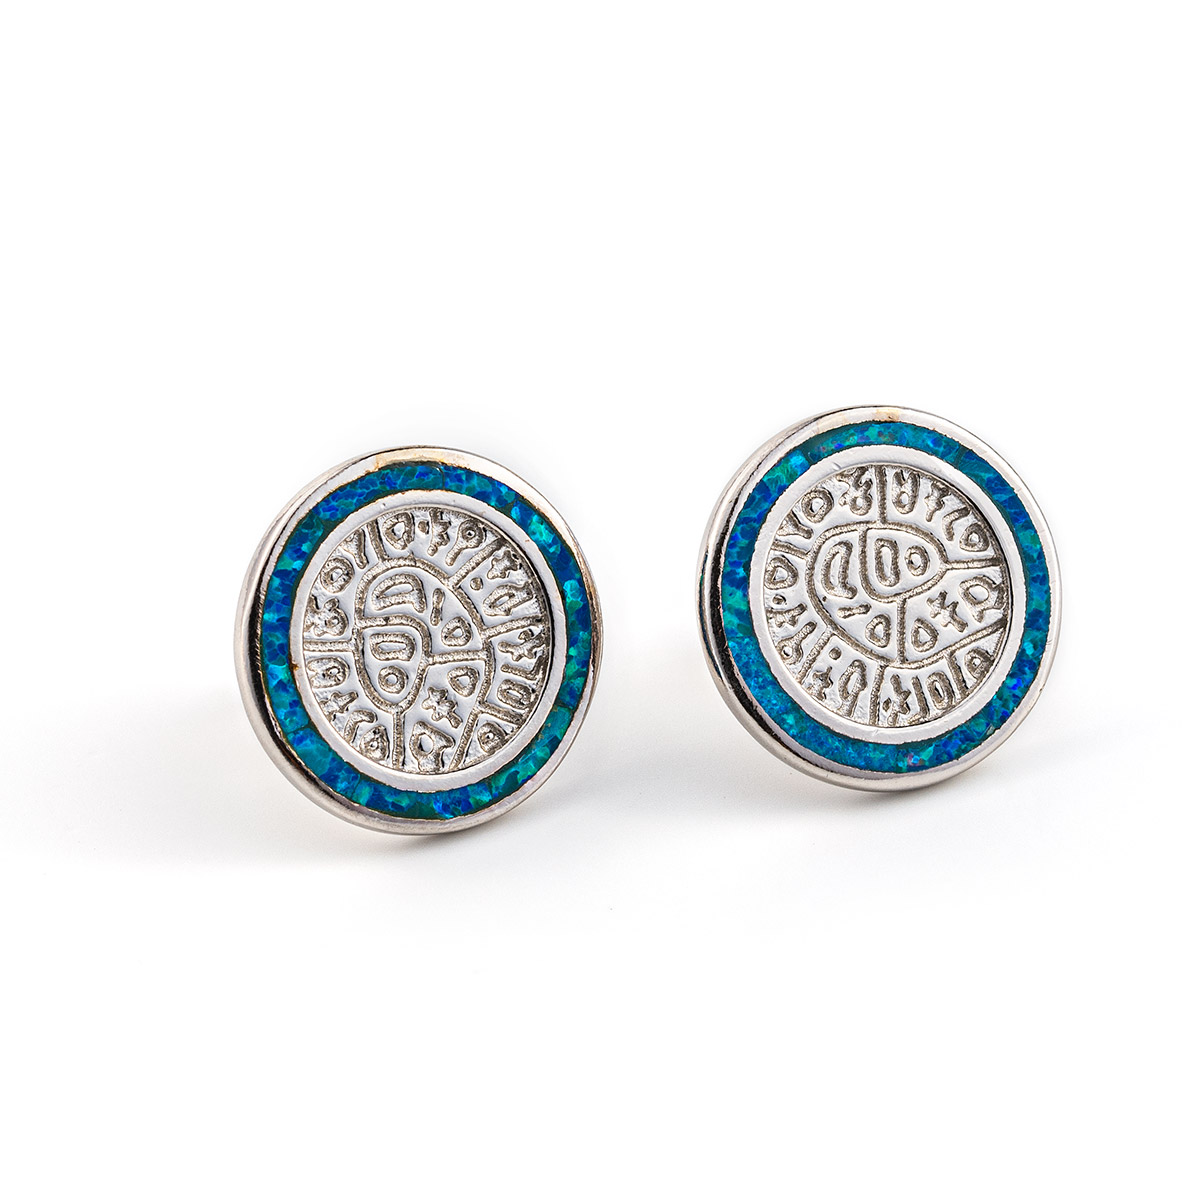 Phaistos Disc Stud Earrings - 925 Sterling Silver with Opal